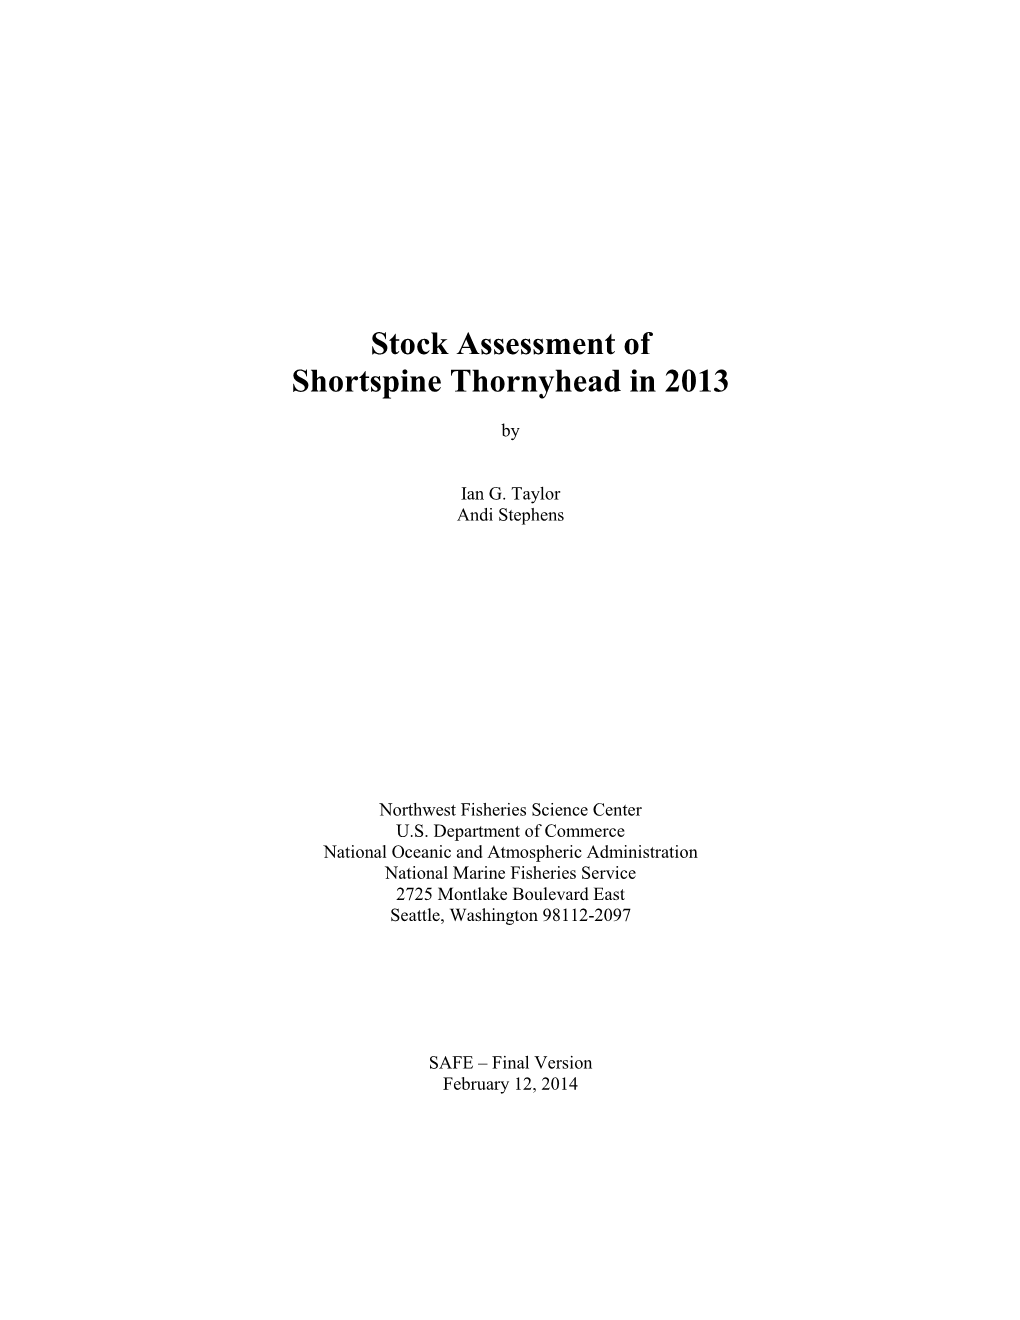 Stock Assessment of Shortspine Thornyhead in 2013